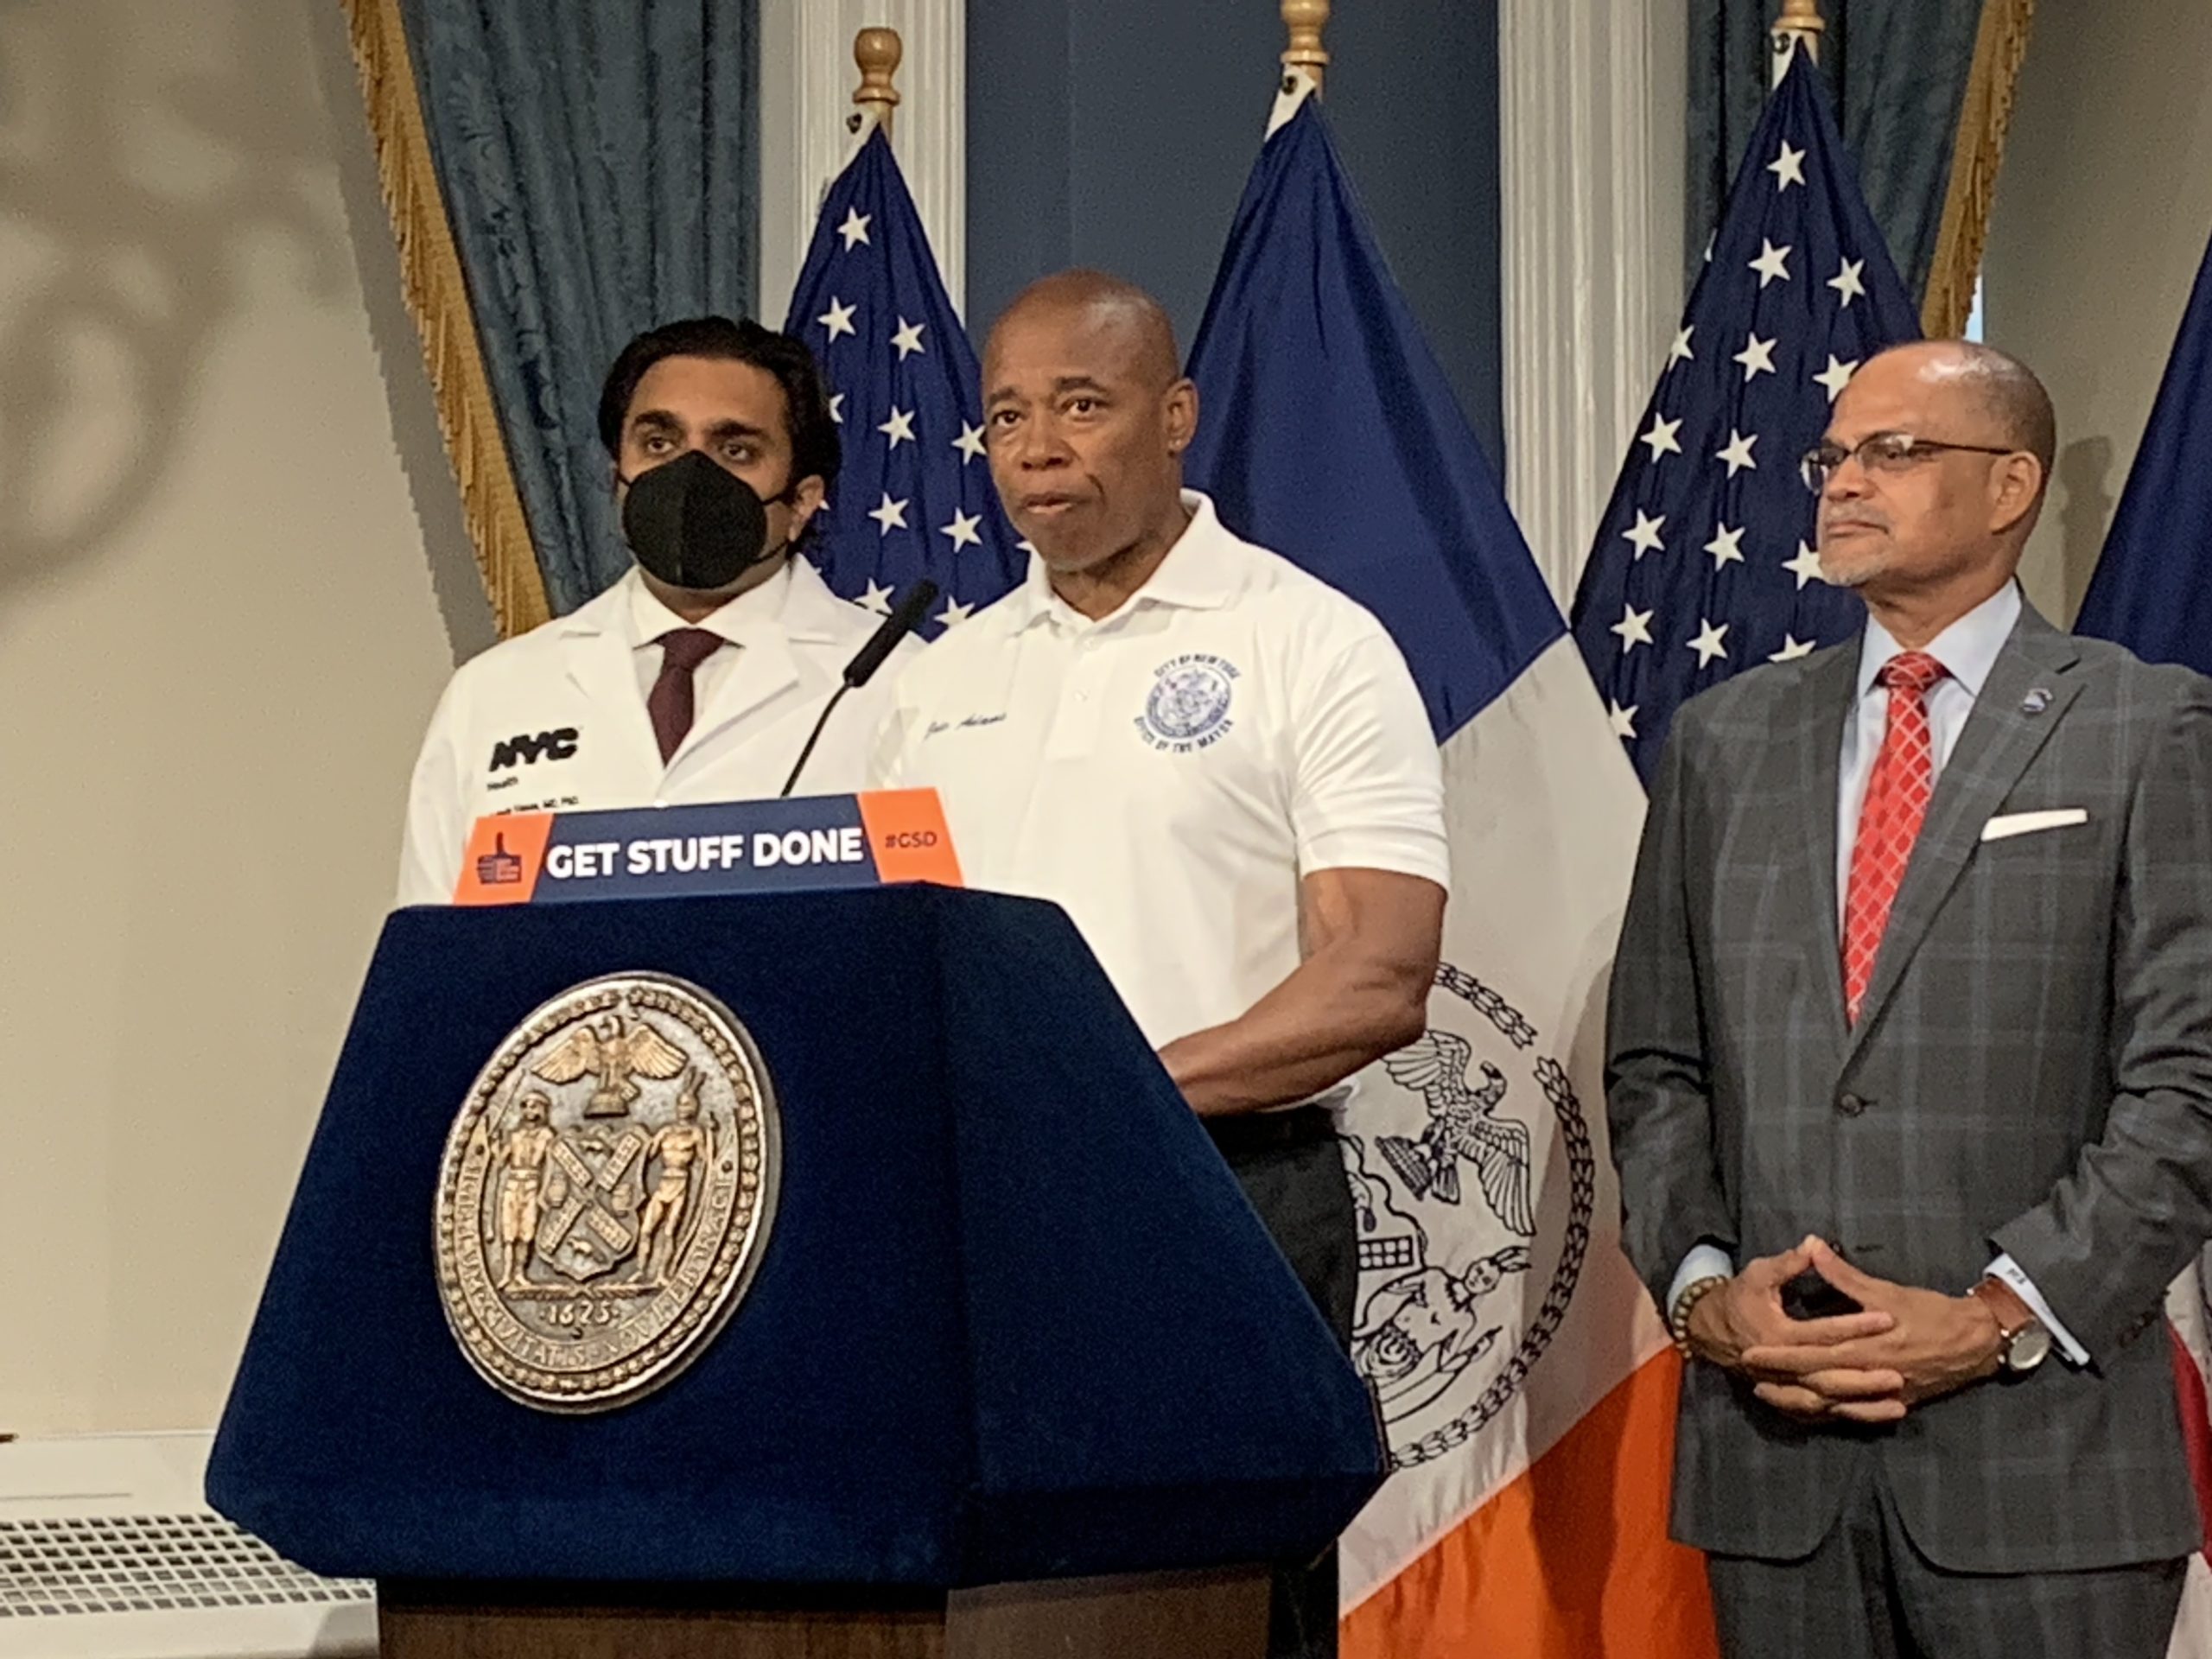 Mayor Adams to lift NYC vaccine mandate for athletes